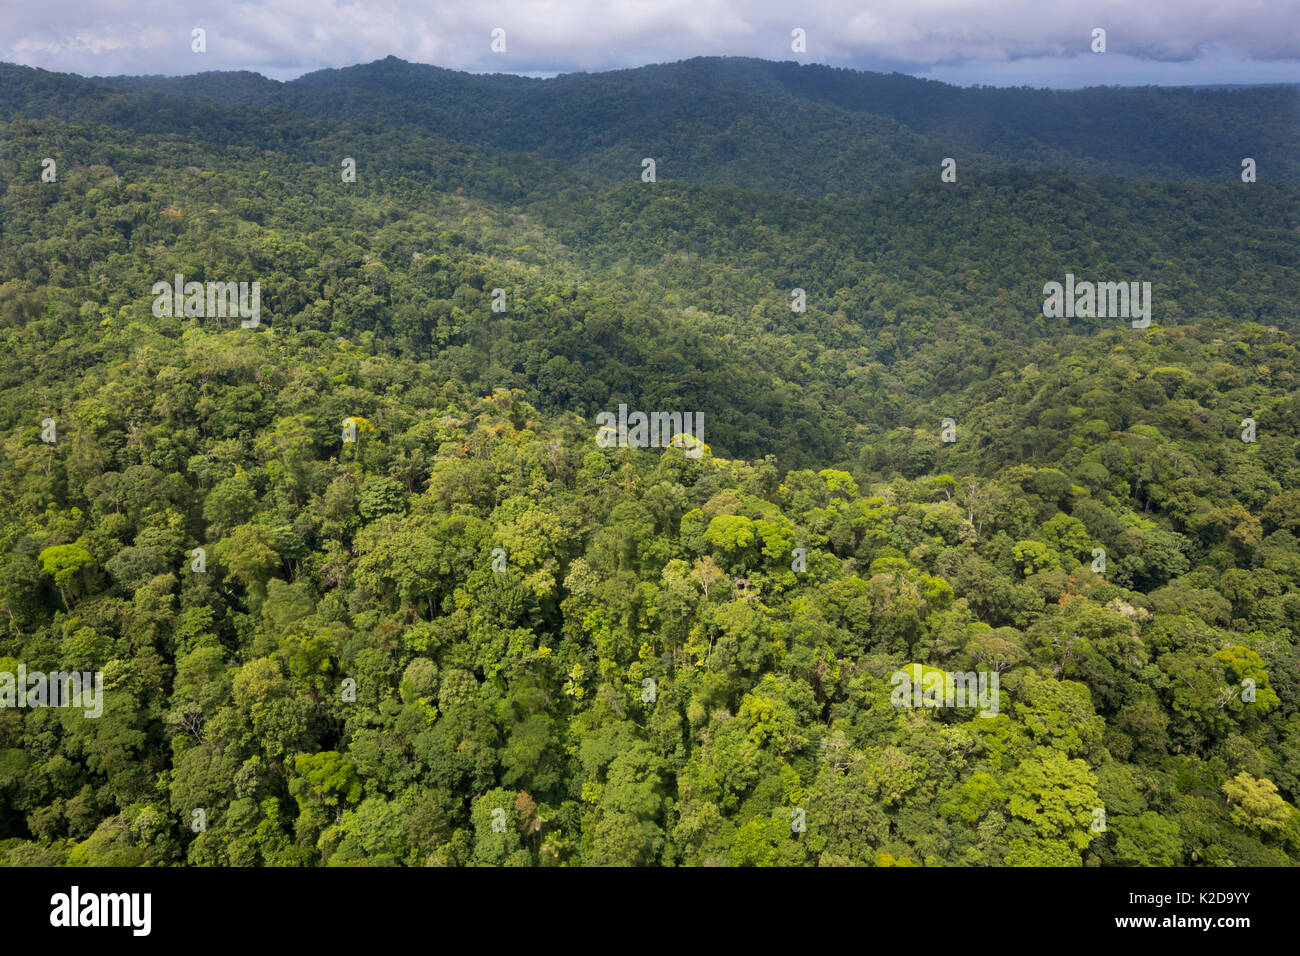 Aerial view of primary lowland tropical rainforest, Osa Peninsula, Costa Rica Stock Photo